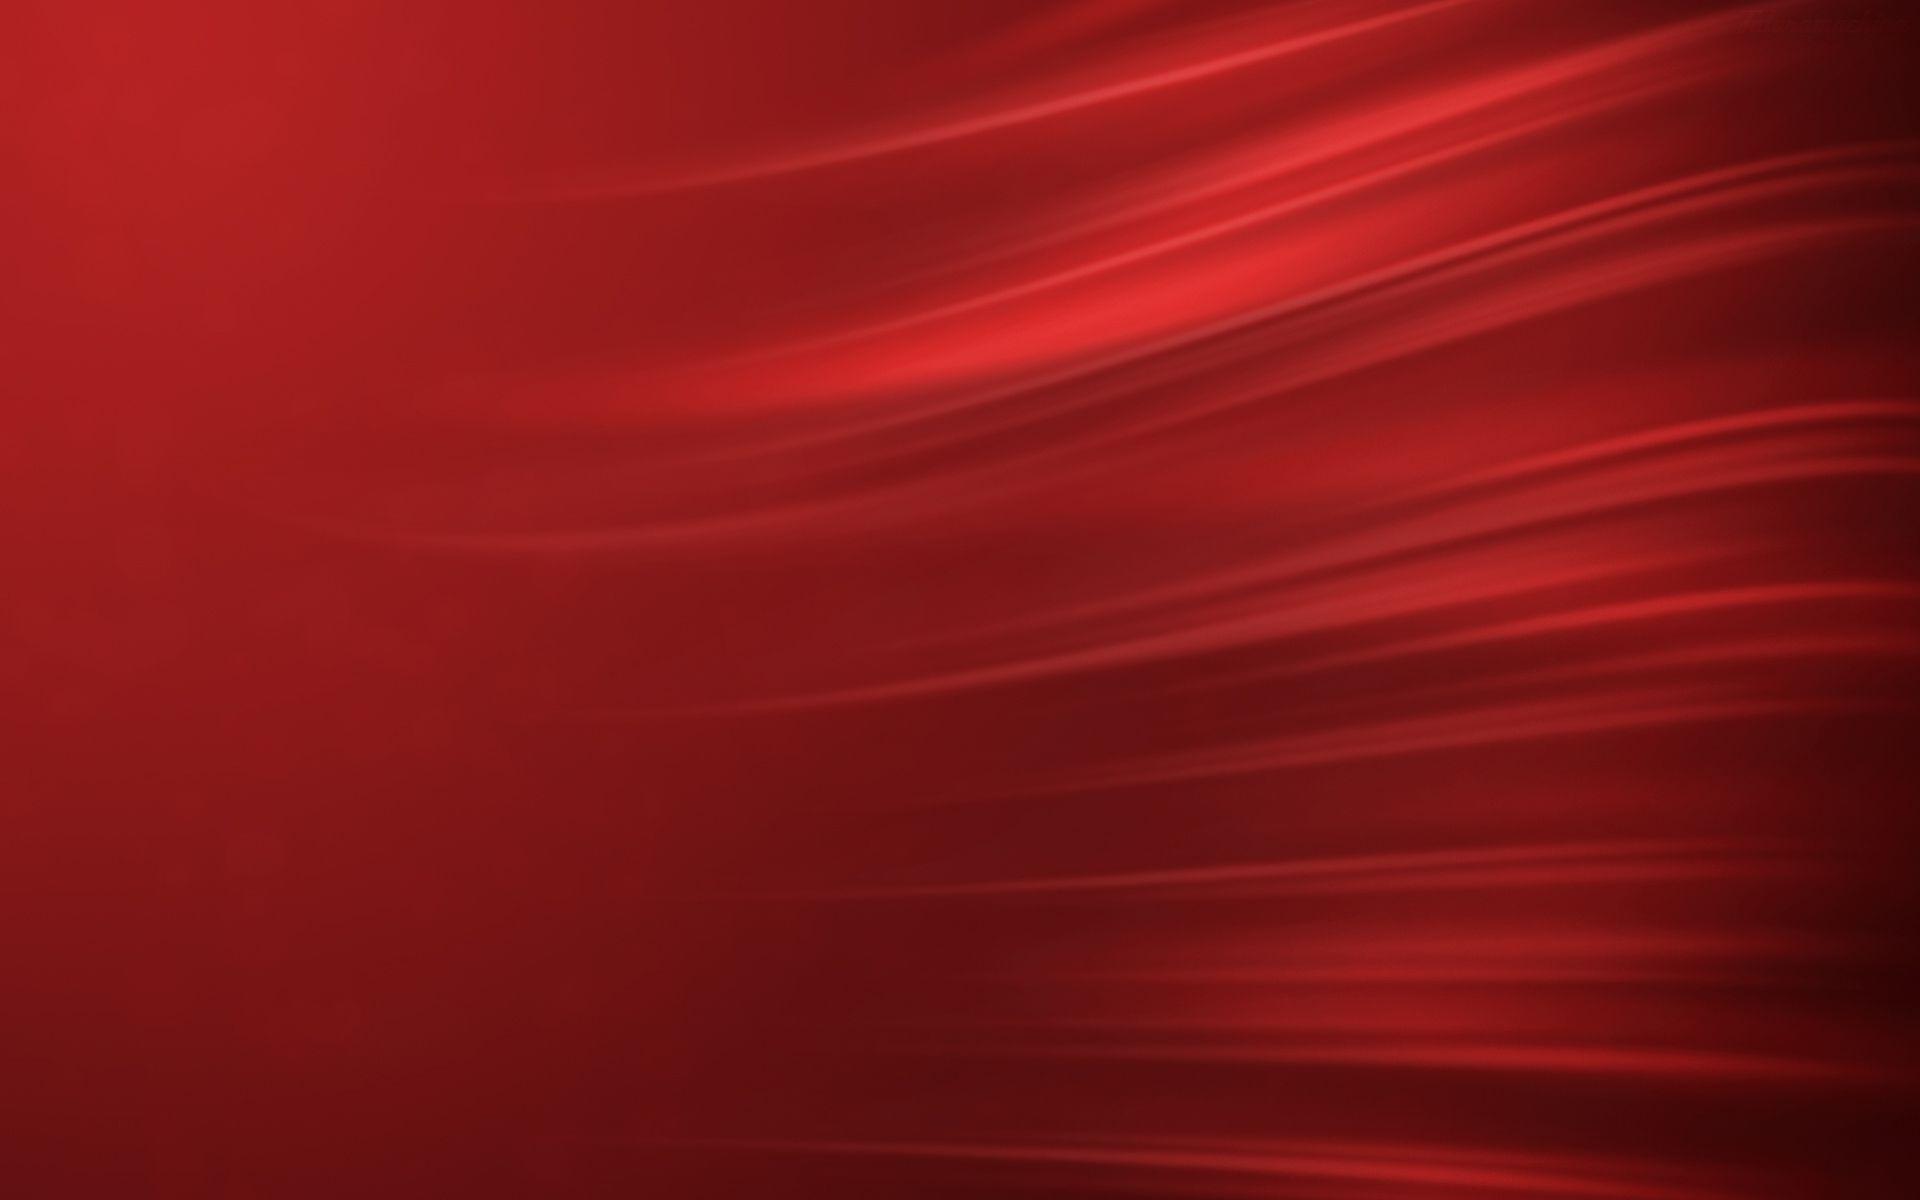 Free Red Background 18839 1920x1200 px